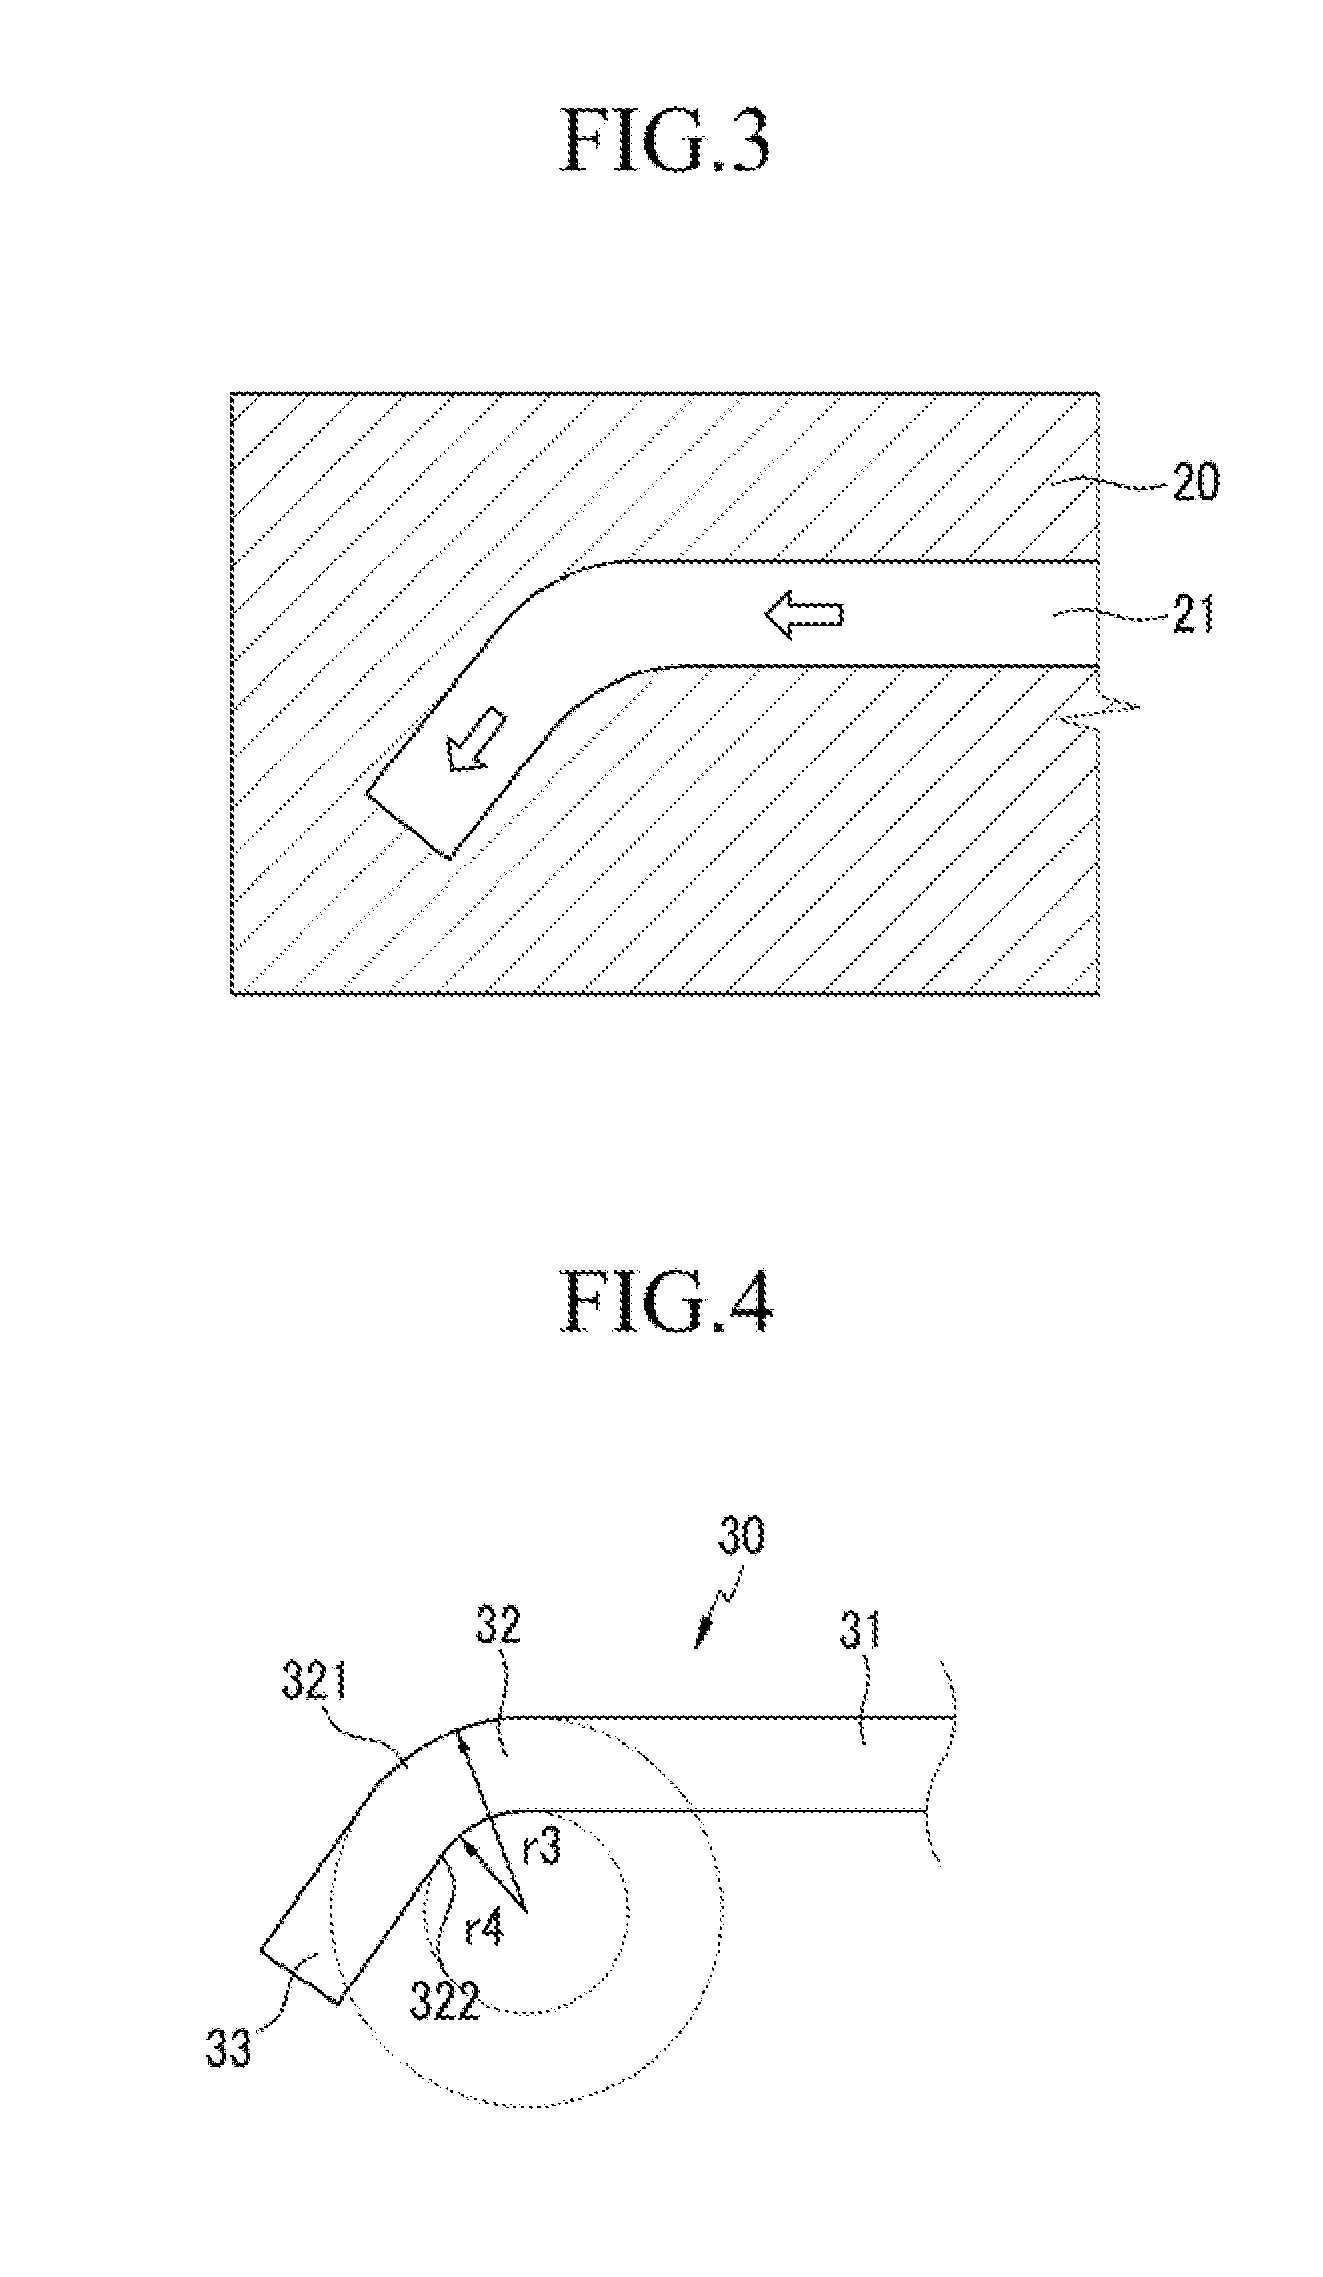 Cover window and display device with cover window